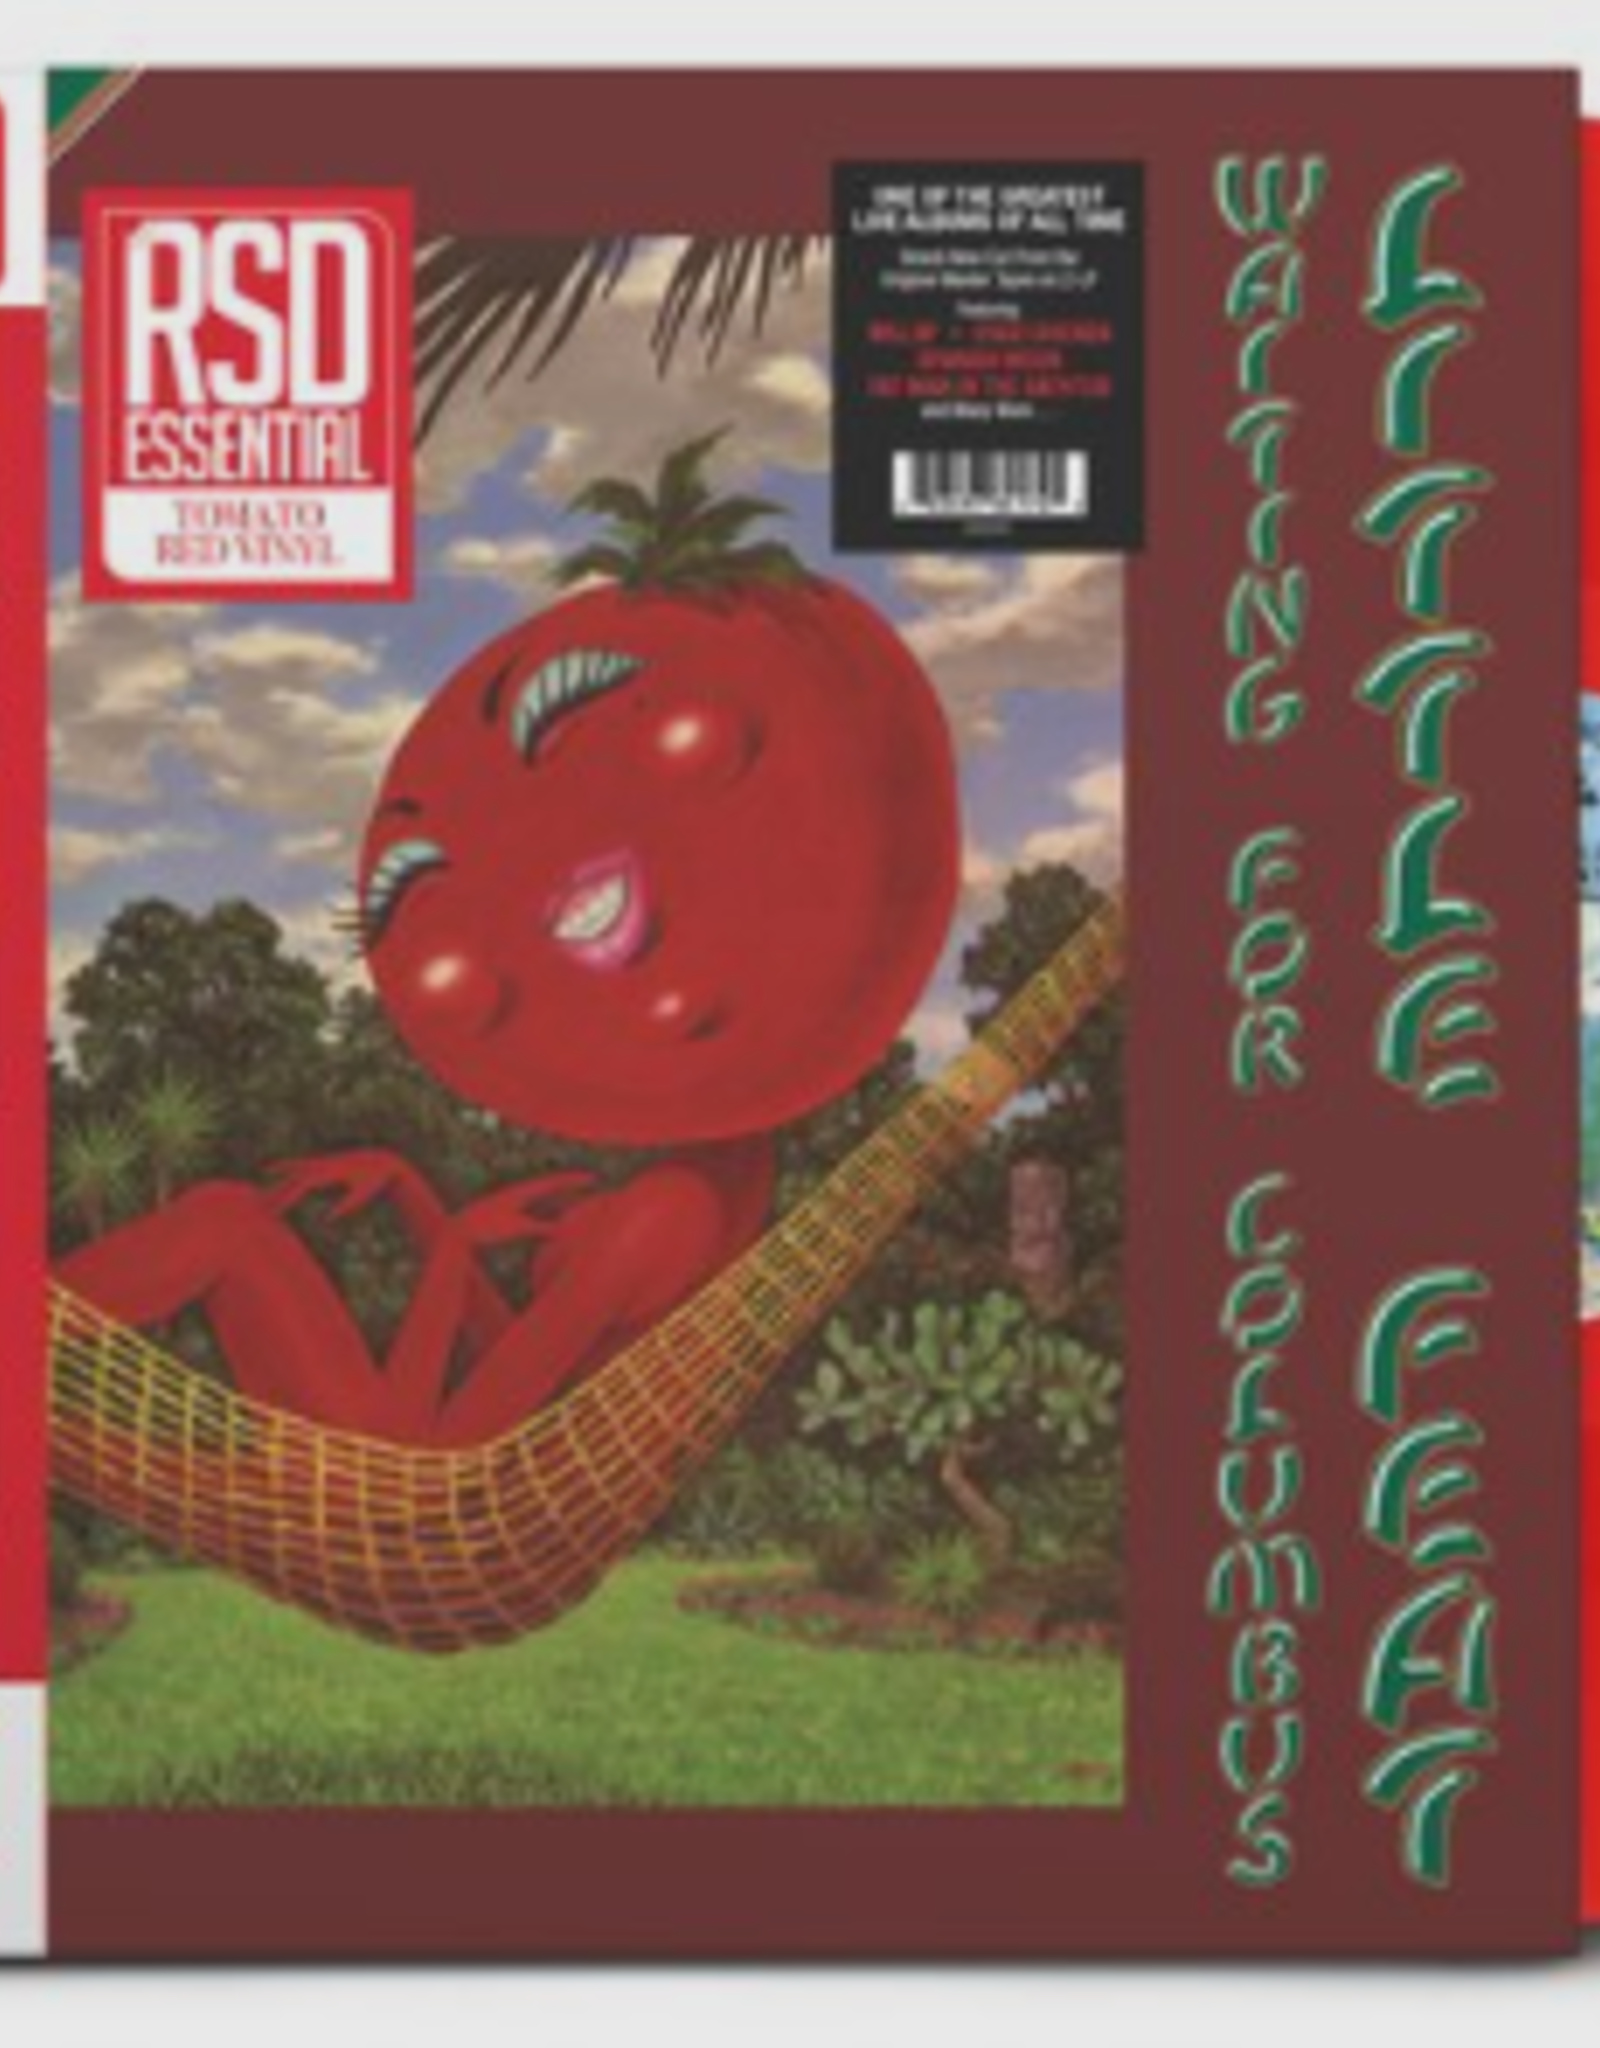 Little Feat - Waiting For Columbus (Tomato Red Vinyl)